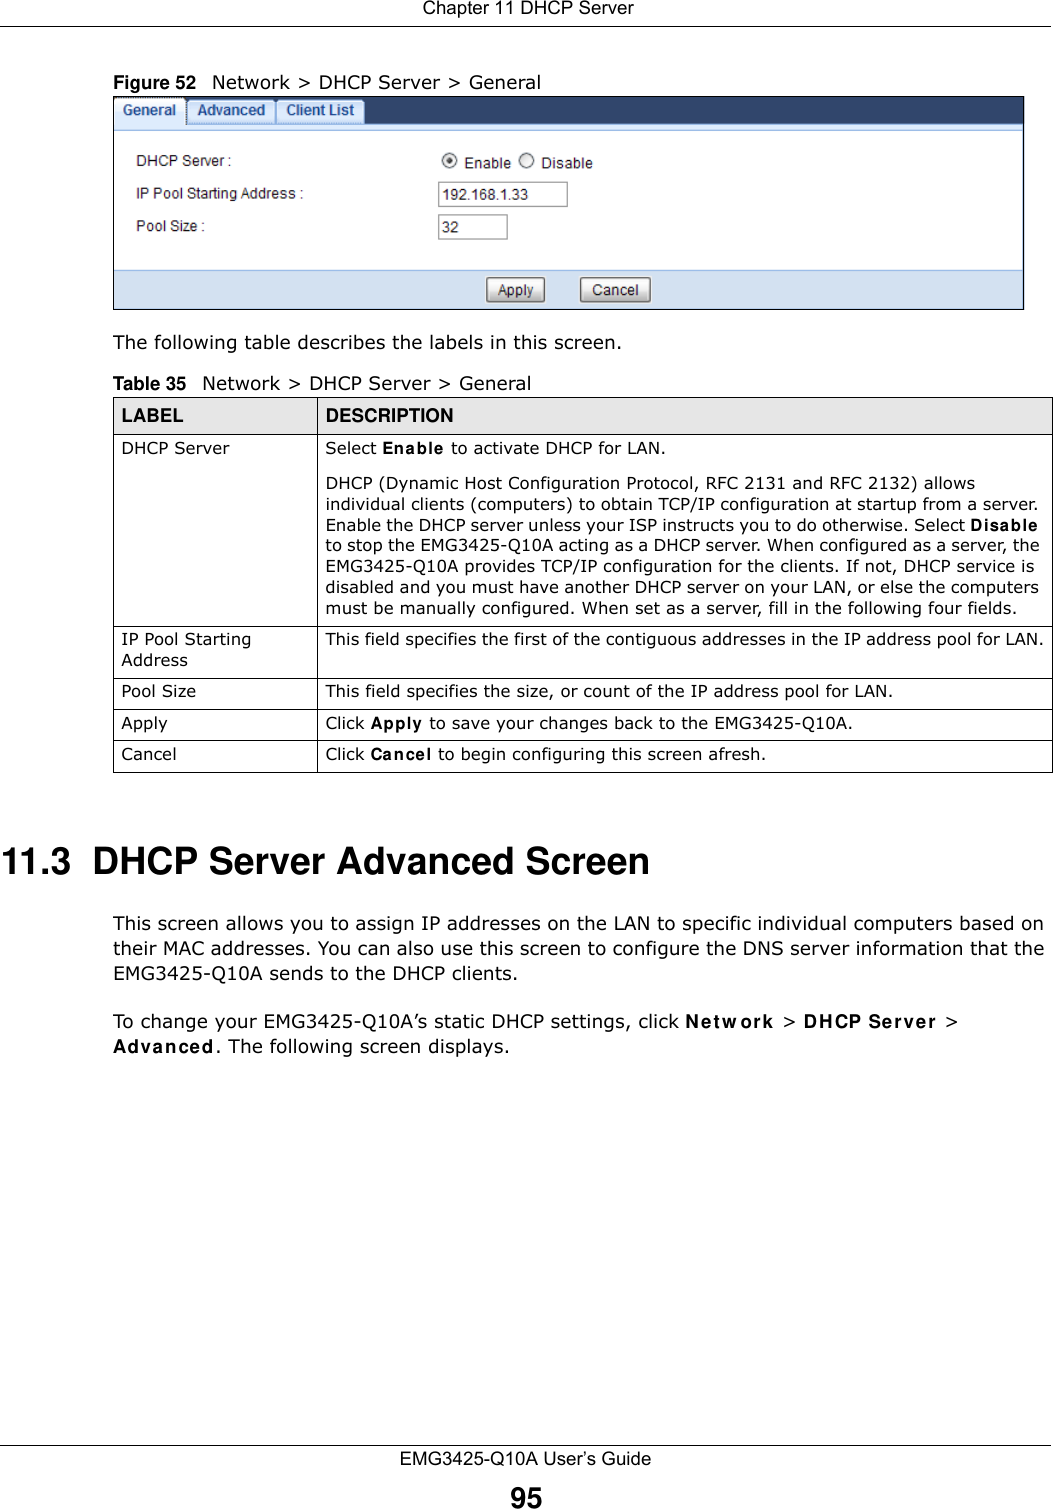  Chapter 11 DHCP ServerEMG3425-Q10A User’s Guide95Figure 52   Network &gt; DHCP Server &gt; General   The following table describes the labels in this screen.11.3  DHCP Server Advanced Screen    This screen allows you to assign IP addresses on the LAN to specific individual computers based on their MAC addresses. You can also use this screen to configure the DNS server information that the EMG3425-Q10A sends to the DHCP clients.To change your EMG3425-Q10A’s static DHCP settings, click N e t w o r k  &gt; DHCP Server &gt; Advance d . The following screen displays.Table 35   Network &gt; DHCP Server &gt; General  LABEL DESCRIPTIONDHCP Server Select Ena ble to activate DHCP for LAN.DHCP (Dynamic Host Configuration Protocol, RFC 2131 and RFC 2132) allows individual clients (computers) to obtain TCP/IP configuration at startup from a server. Enable the DHCP server unless your ISP instructs you to do otherwise. Select Disa ble to stop the EMG3425-Q10A acting as a DHCP server. When configured as a server, the EMG3425-Q10A provides TCP/IP configuration for the clients. If not, DHCP service is disabled and you must have another DHCP server on your LAN, or else the computers must be manually configured. When set as a server, fill in the following four fields.IP Pool Starting AddressThis field specifies the first of the contiguous addresses in the IP address pool for LAN.Pool Size This field specifies the size, or count of the IP address pool for LAN.Apply Click Apply to save your changes back to the EMG3425-Q10A.Cancel Click Cancel to begin configuring this screen afresh.